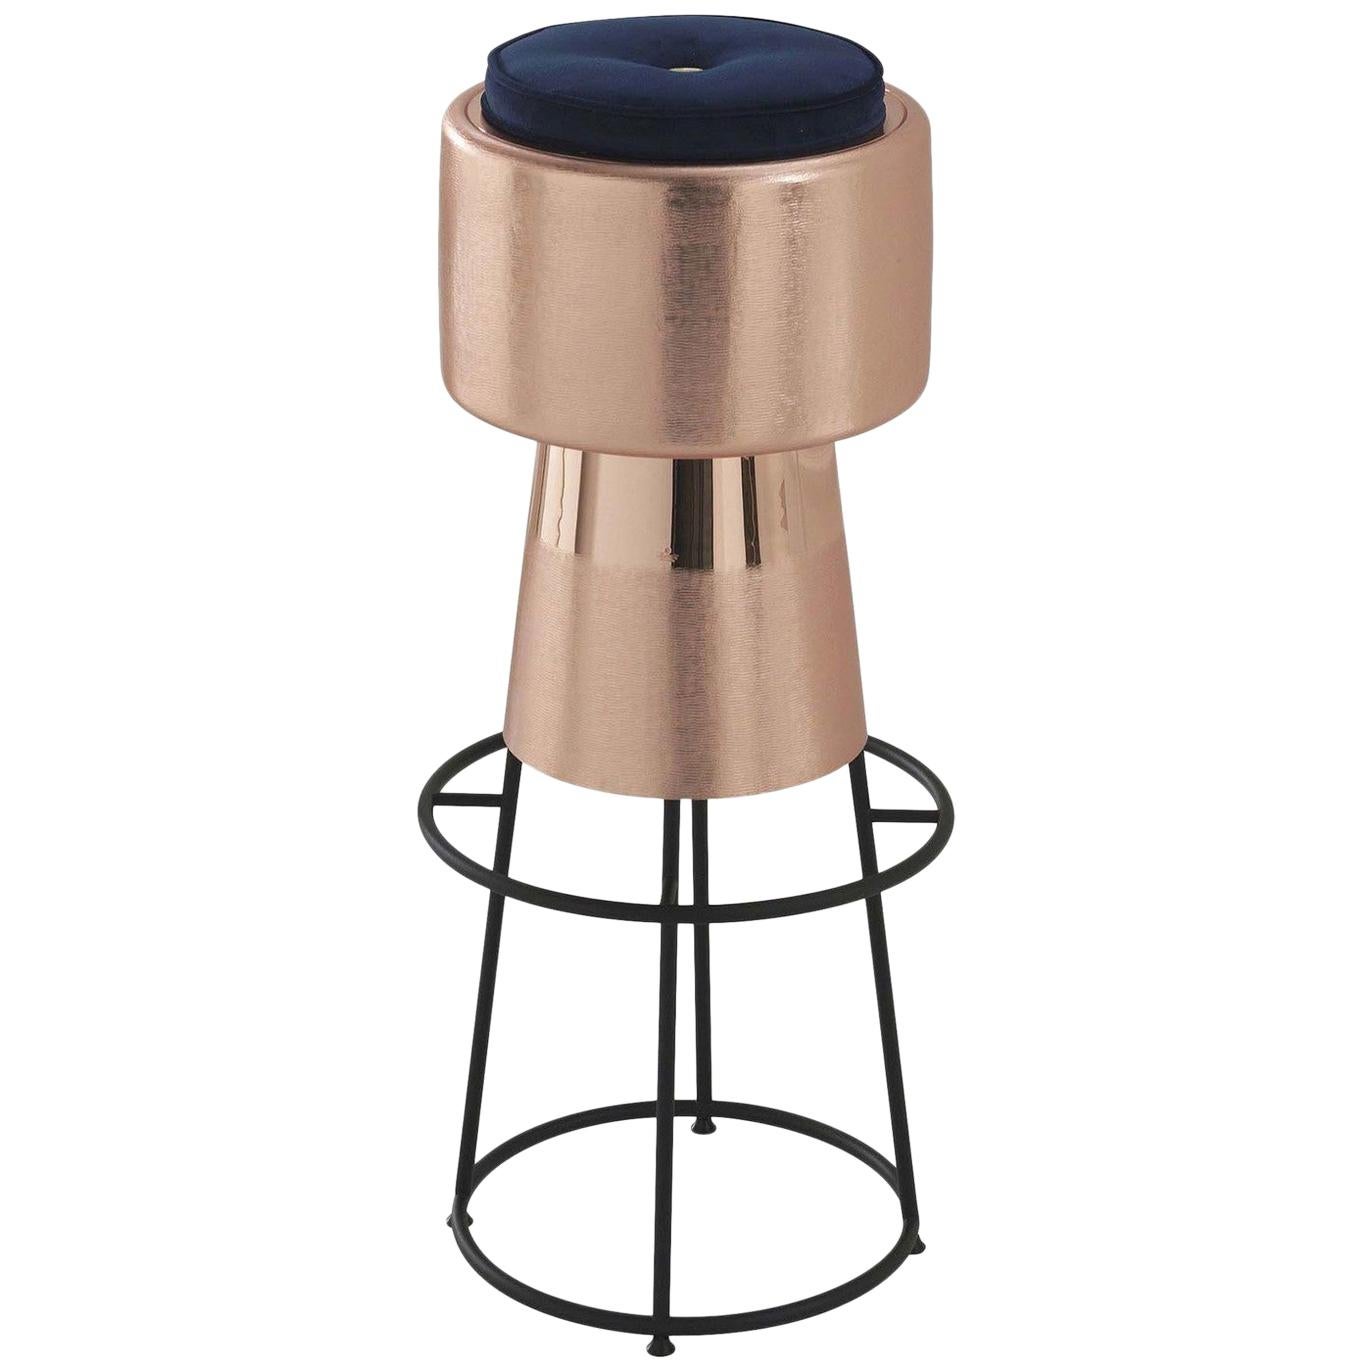 Tappo Copper Bar Stool by NOOII